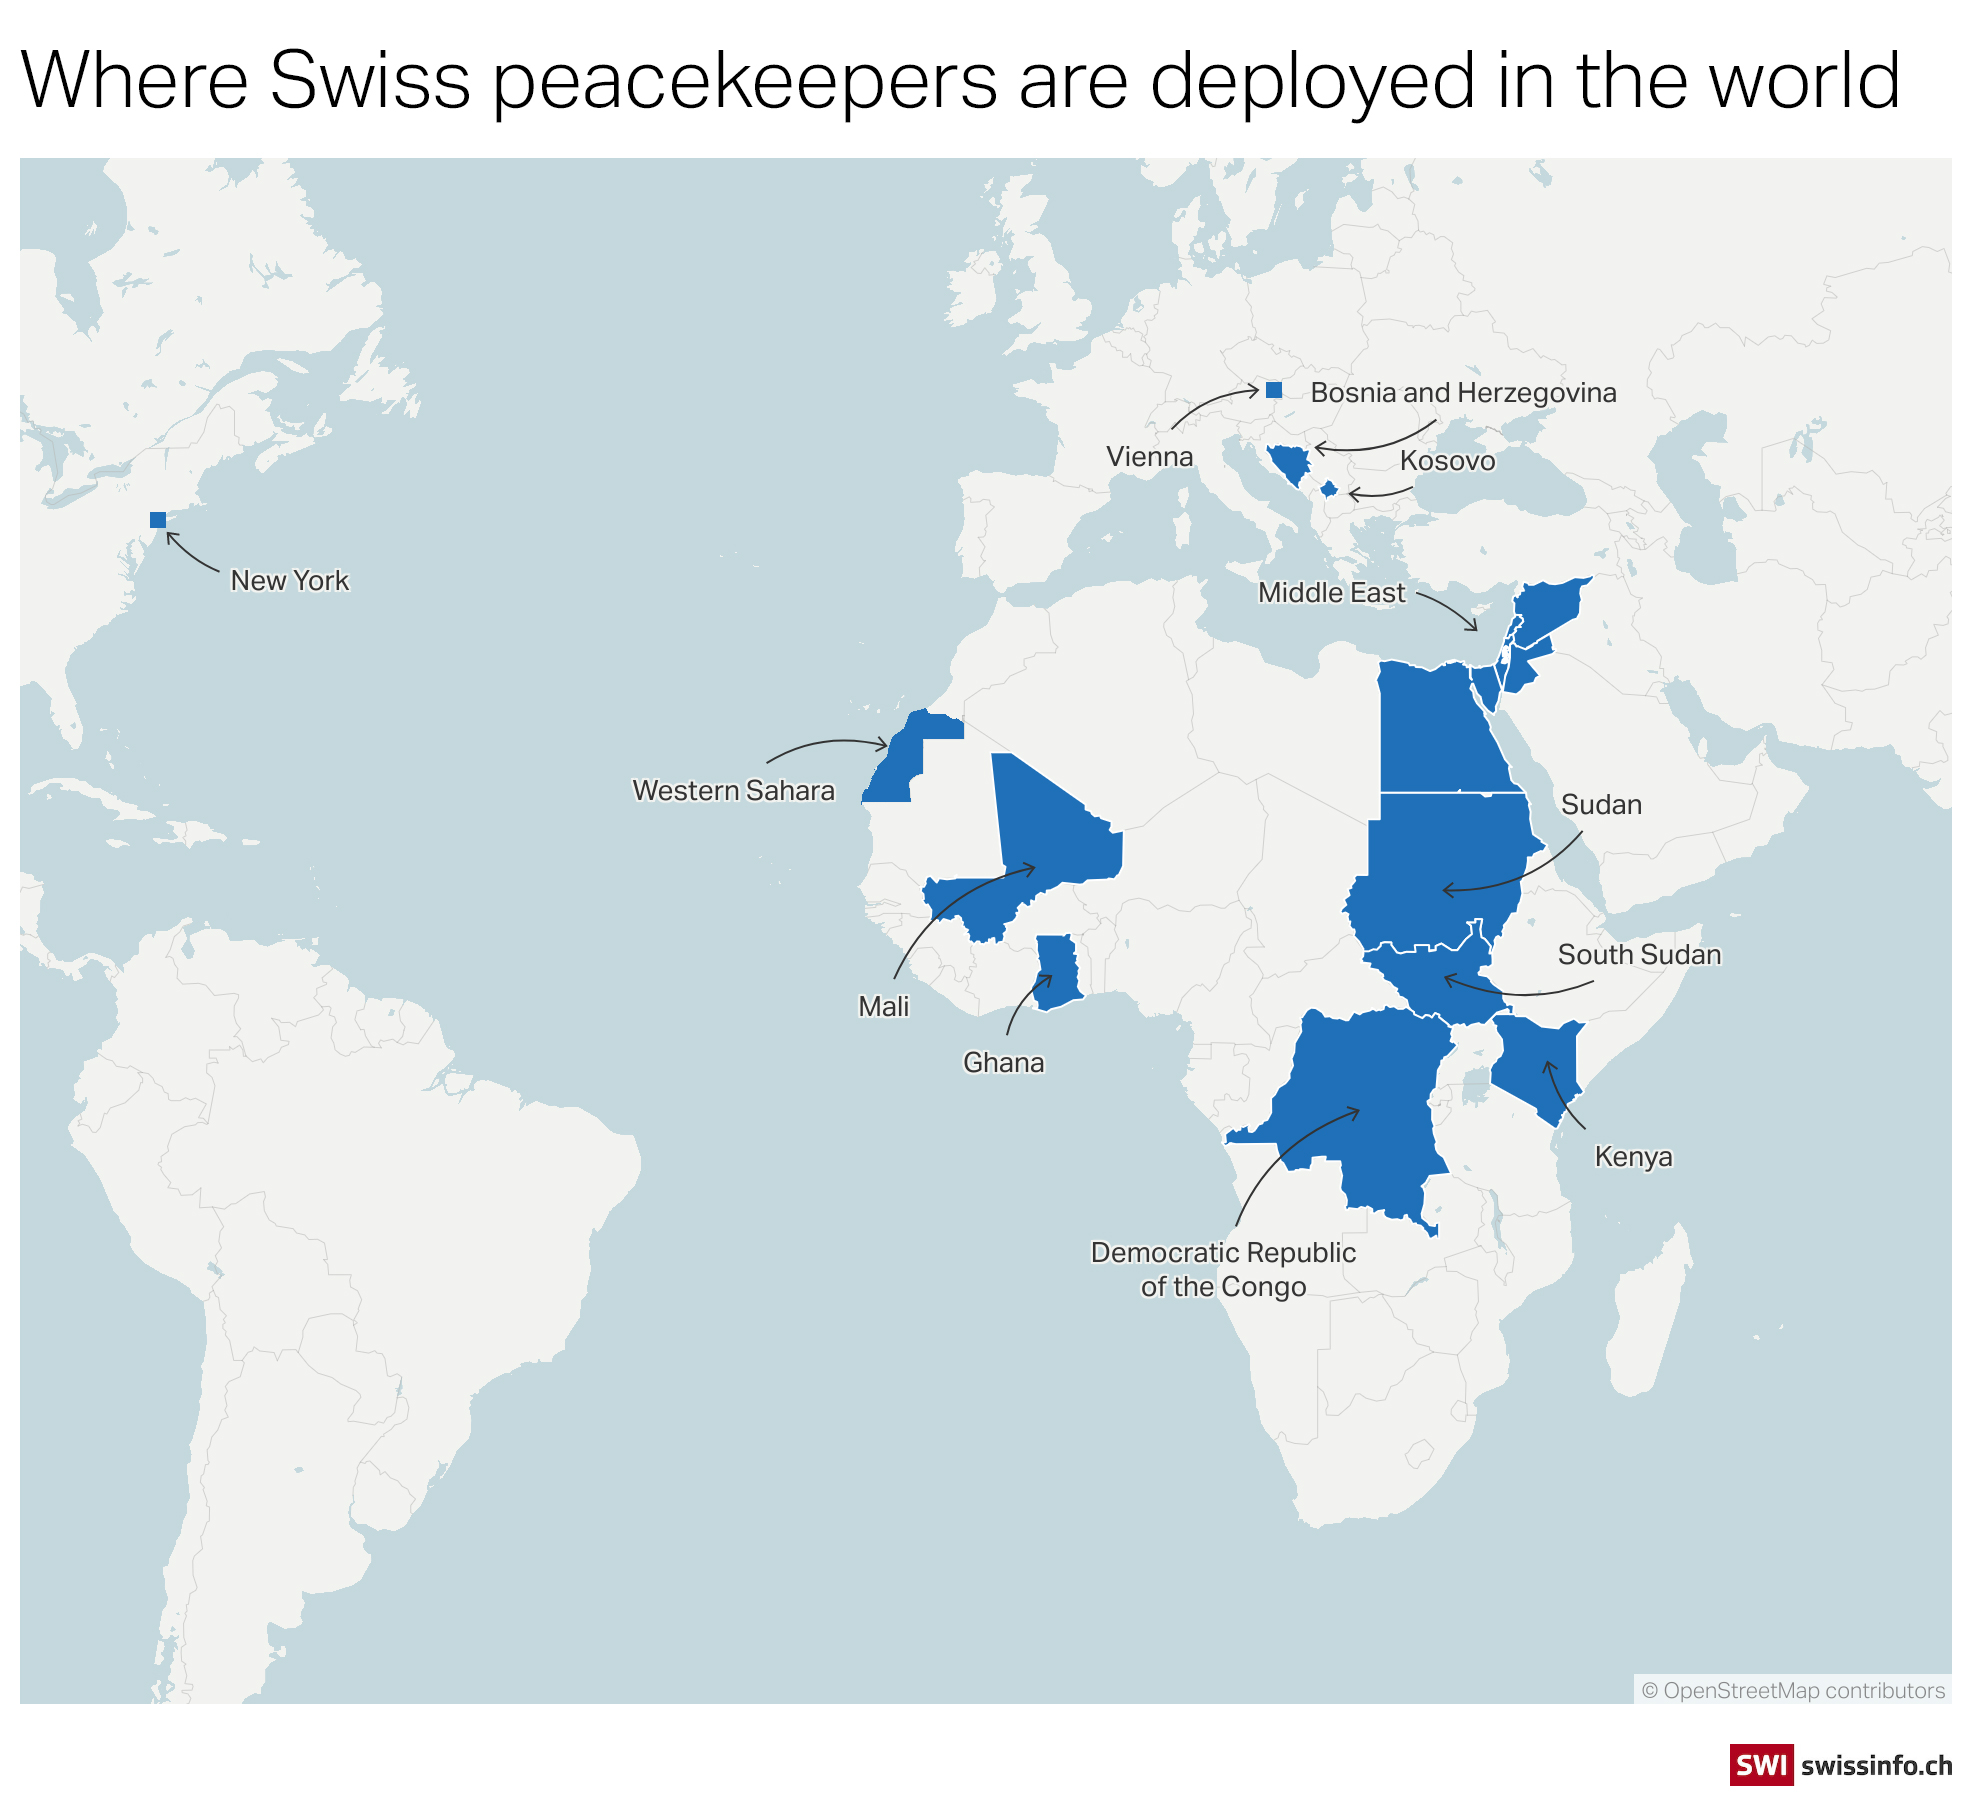 Where Swiss peacekeepers are deployed in world